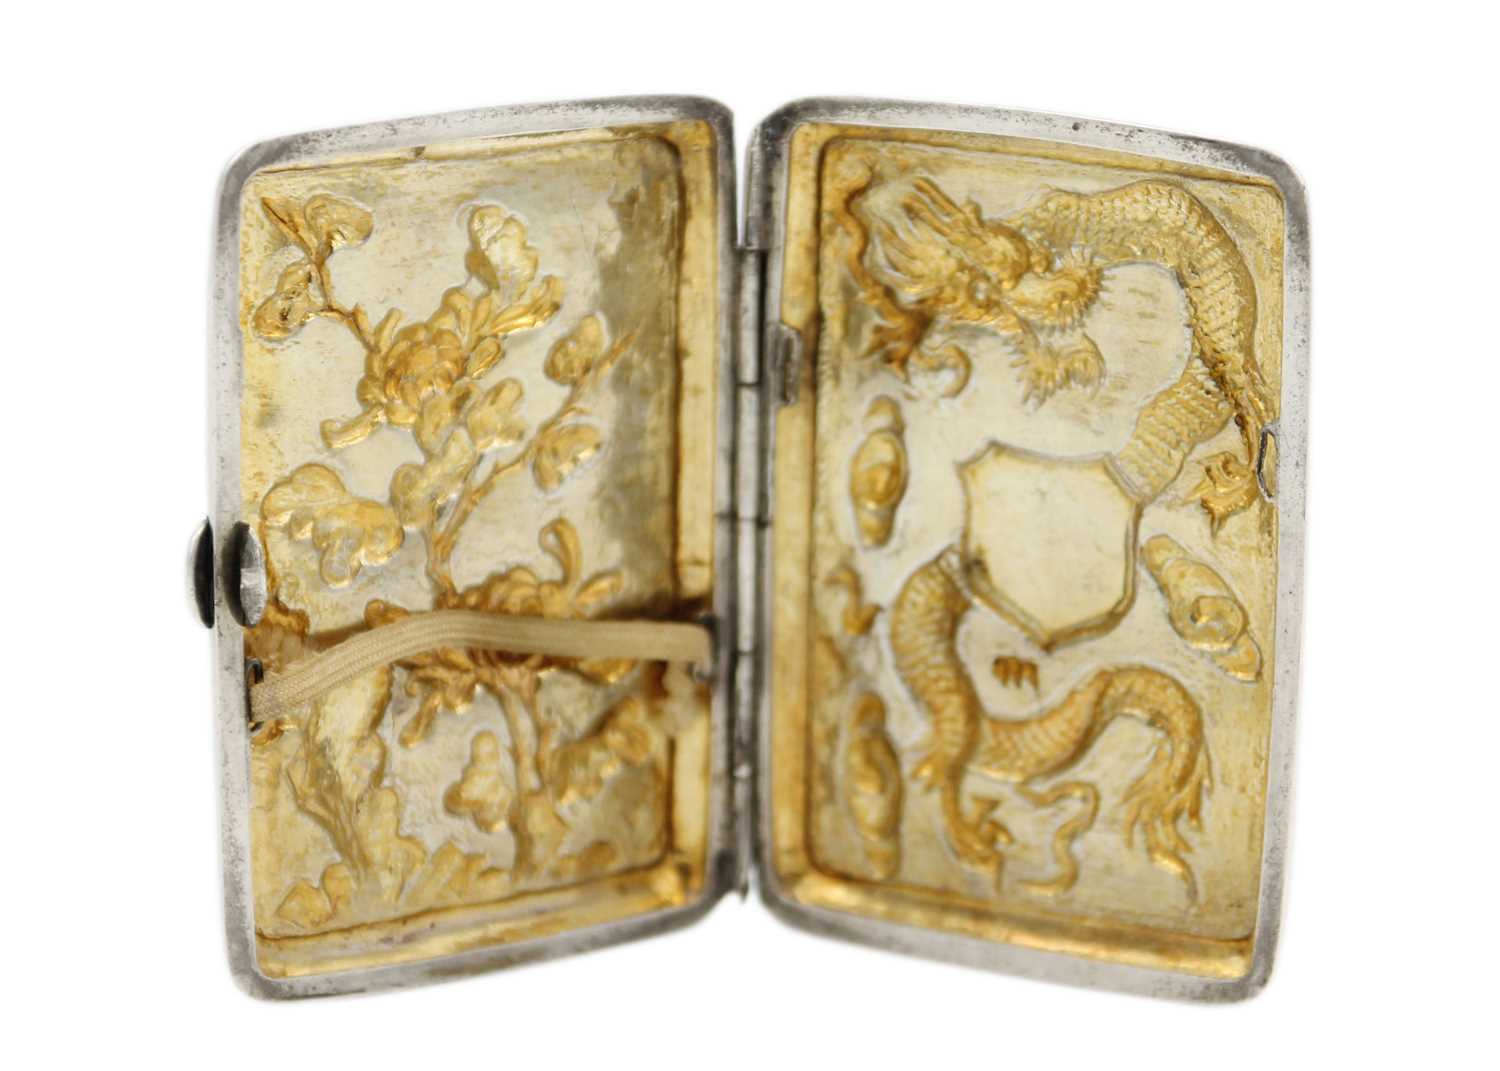 A Chinese silver cigarette case, early 20th century. - Image 3 of 3